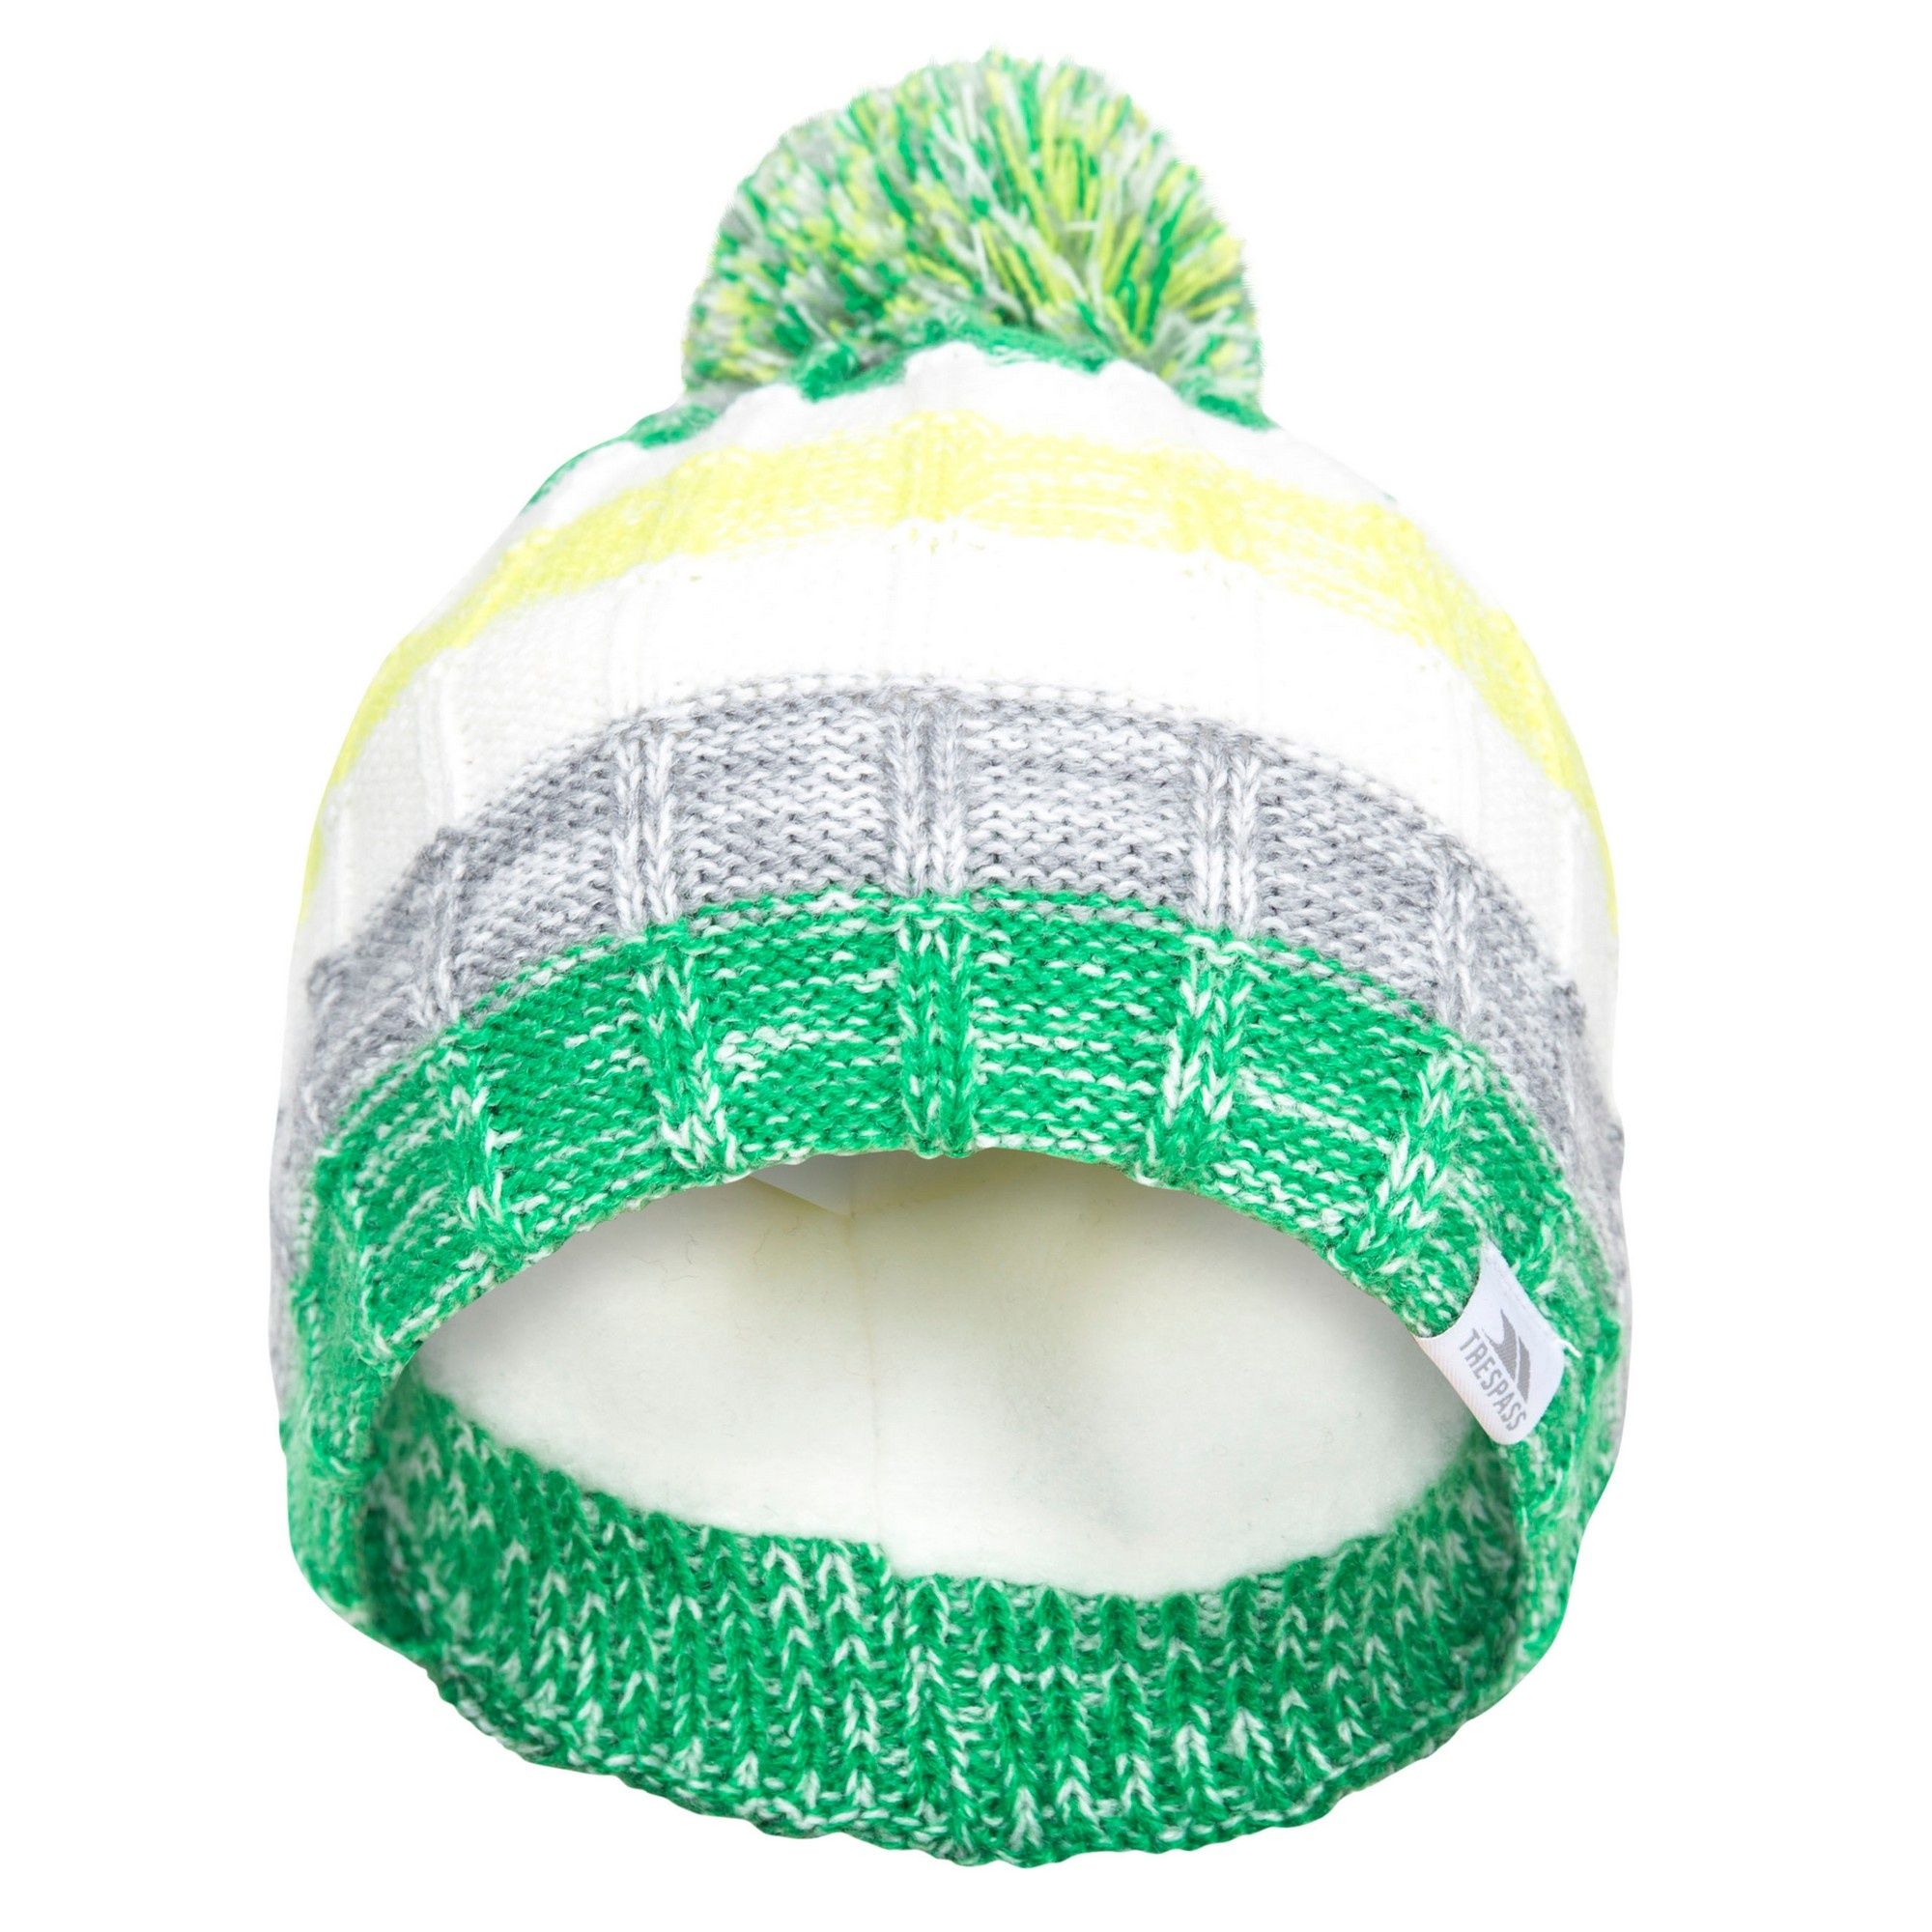 Knitted hat with pom pom. Fully fleece lined. Woven label. Outer: 100% Acrylic, Lining: 100% Polyester Anti pil fleece.